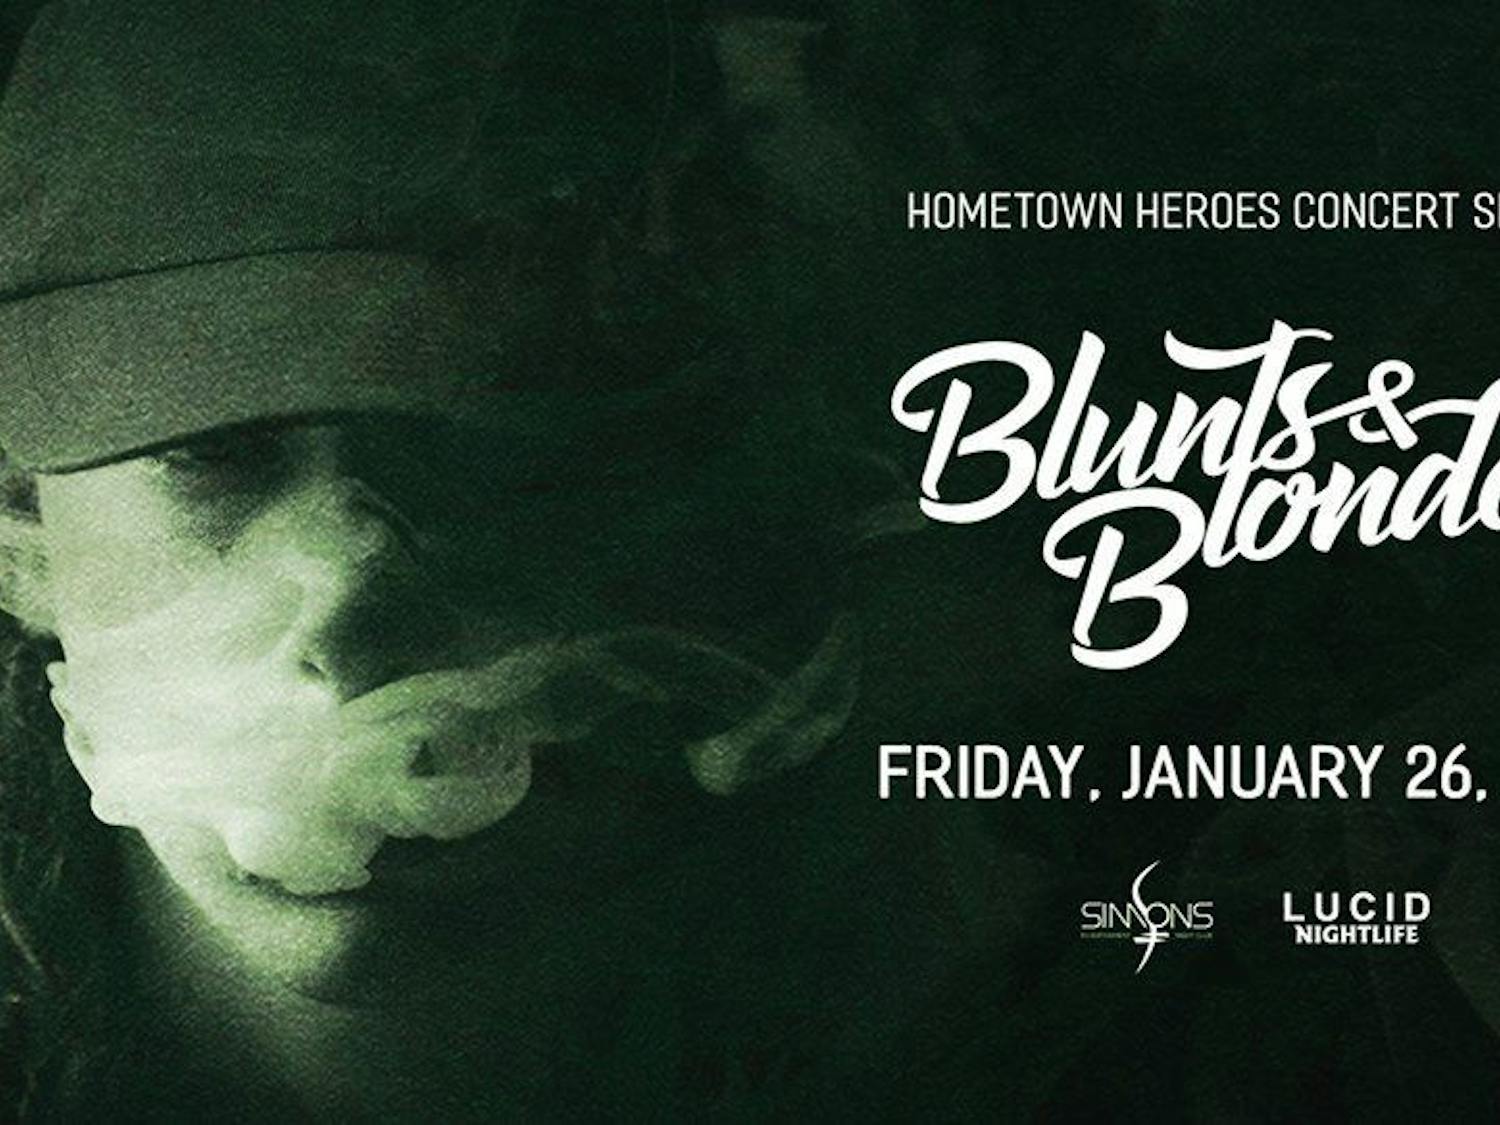 Rising Tampa-based producer Blunts &amp; Blondes will hit Simon’s Nightclub next Friday as a part of Lucid Nightlife’s “Hometown Heroes” Concert Series.